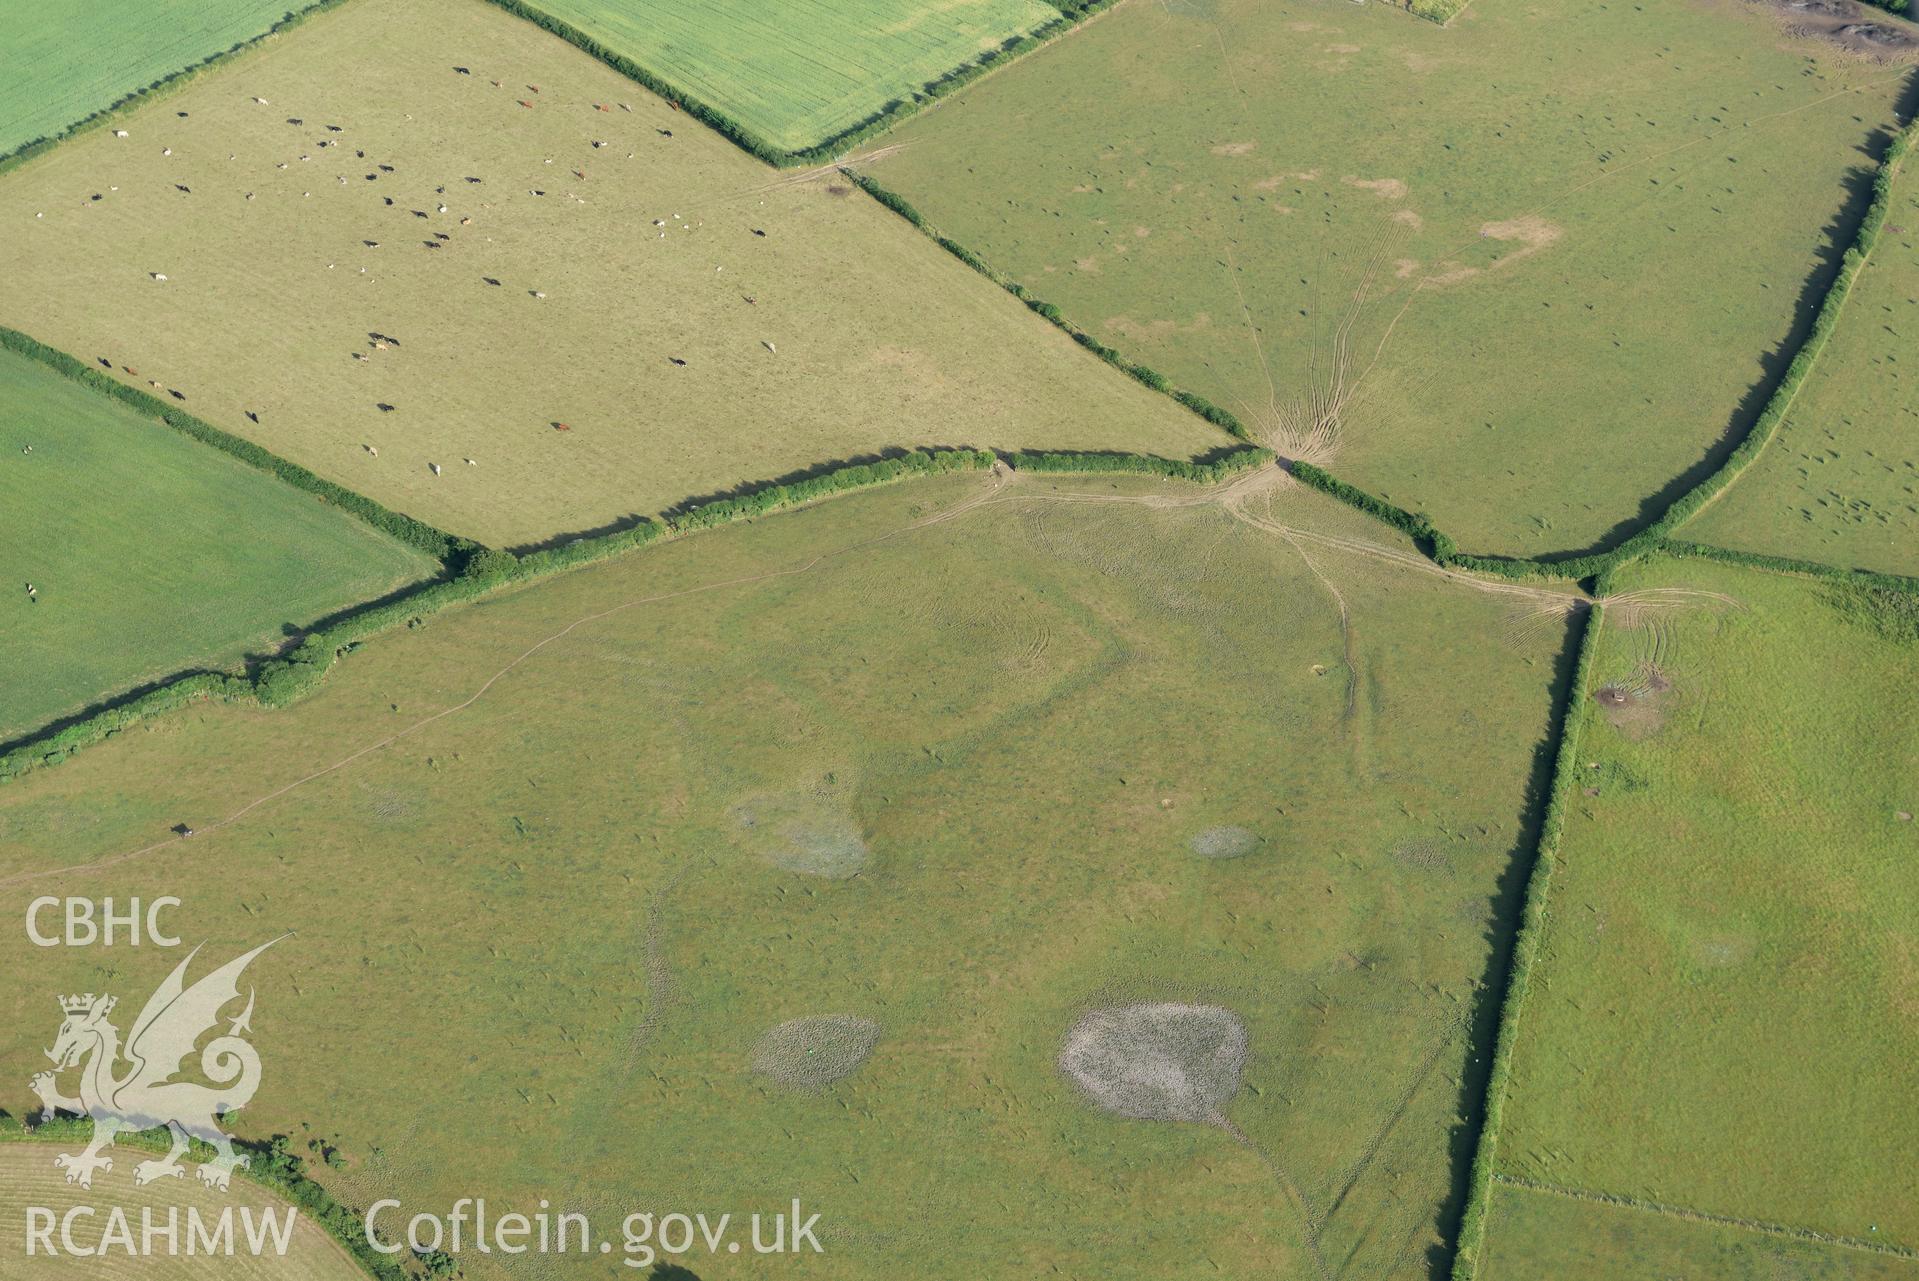 Royal Commission aerial photography of earthworks southwest of Llanddewi Church, with parching, taken on 17th July 2018 during the 2018 drought.